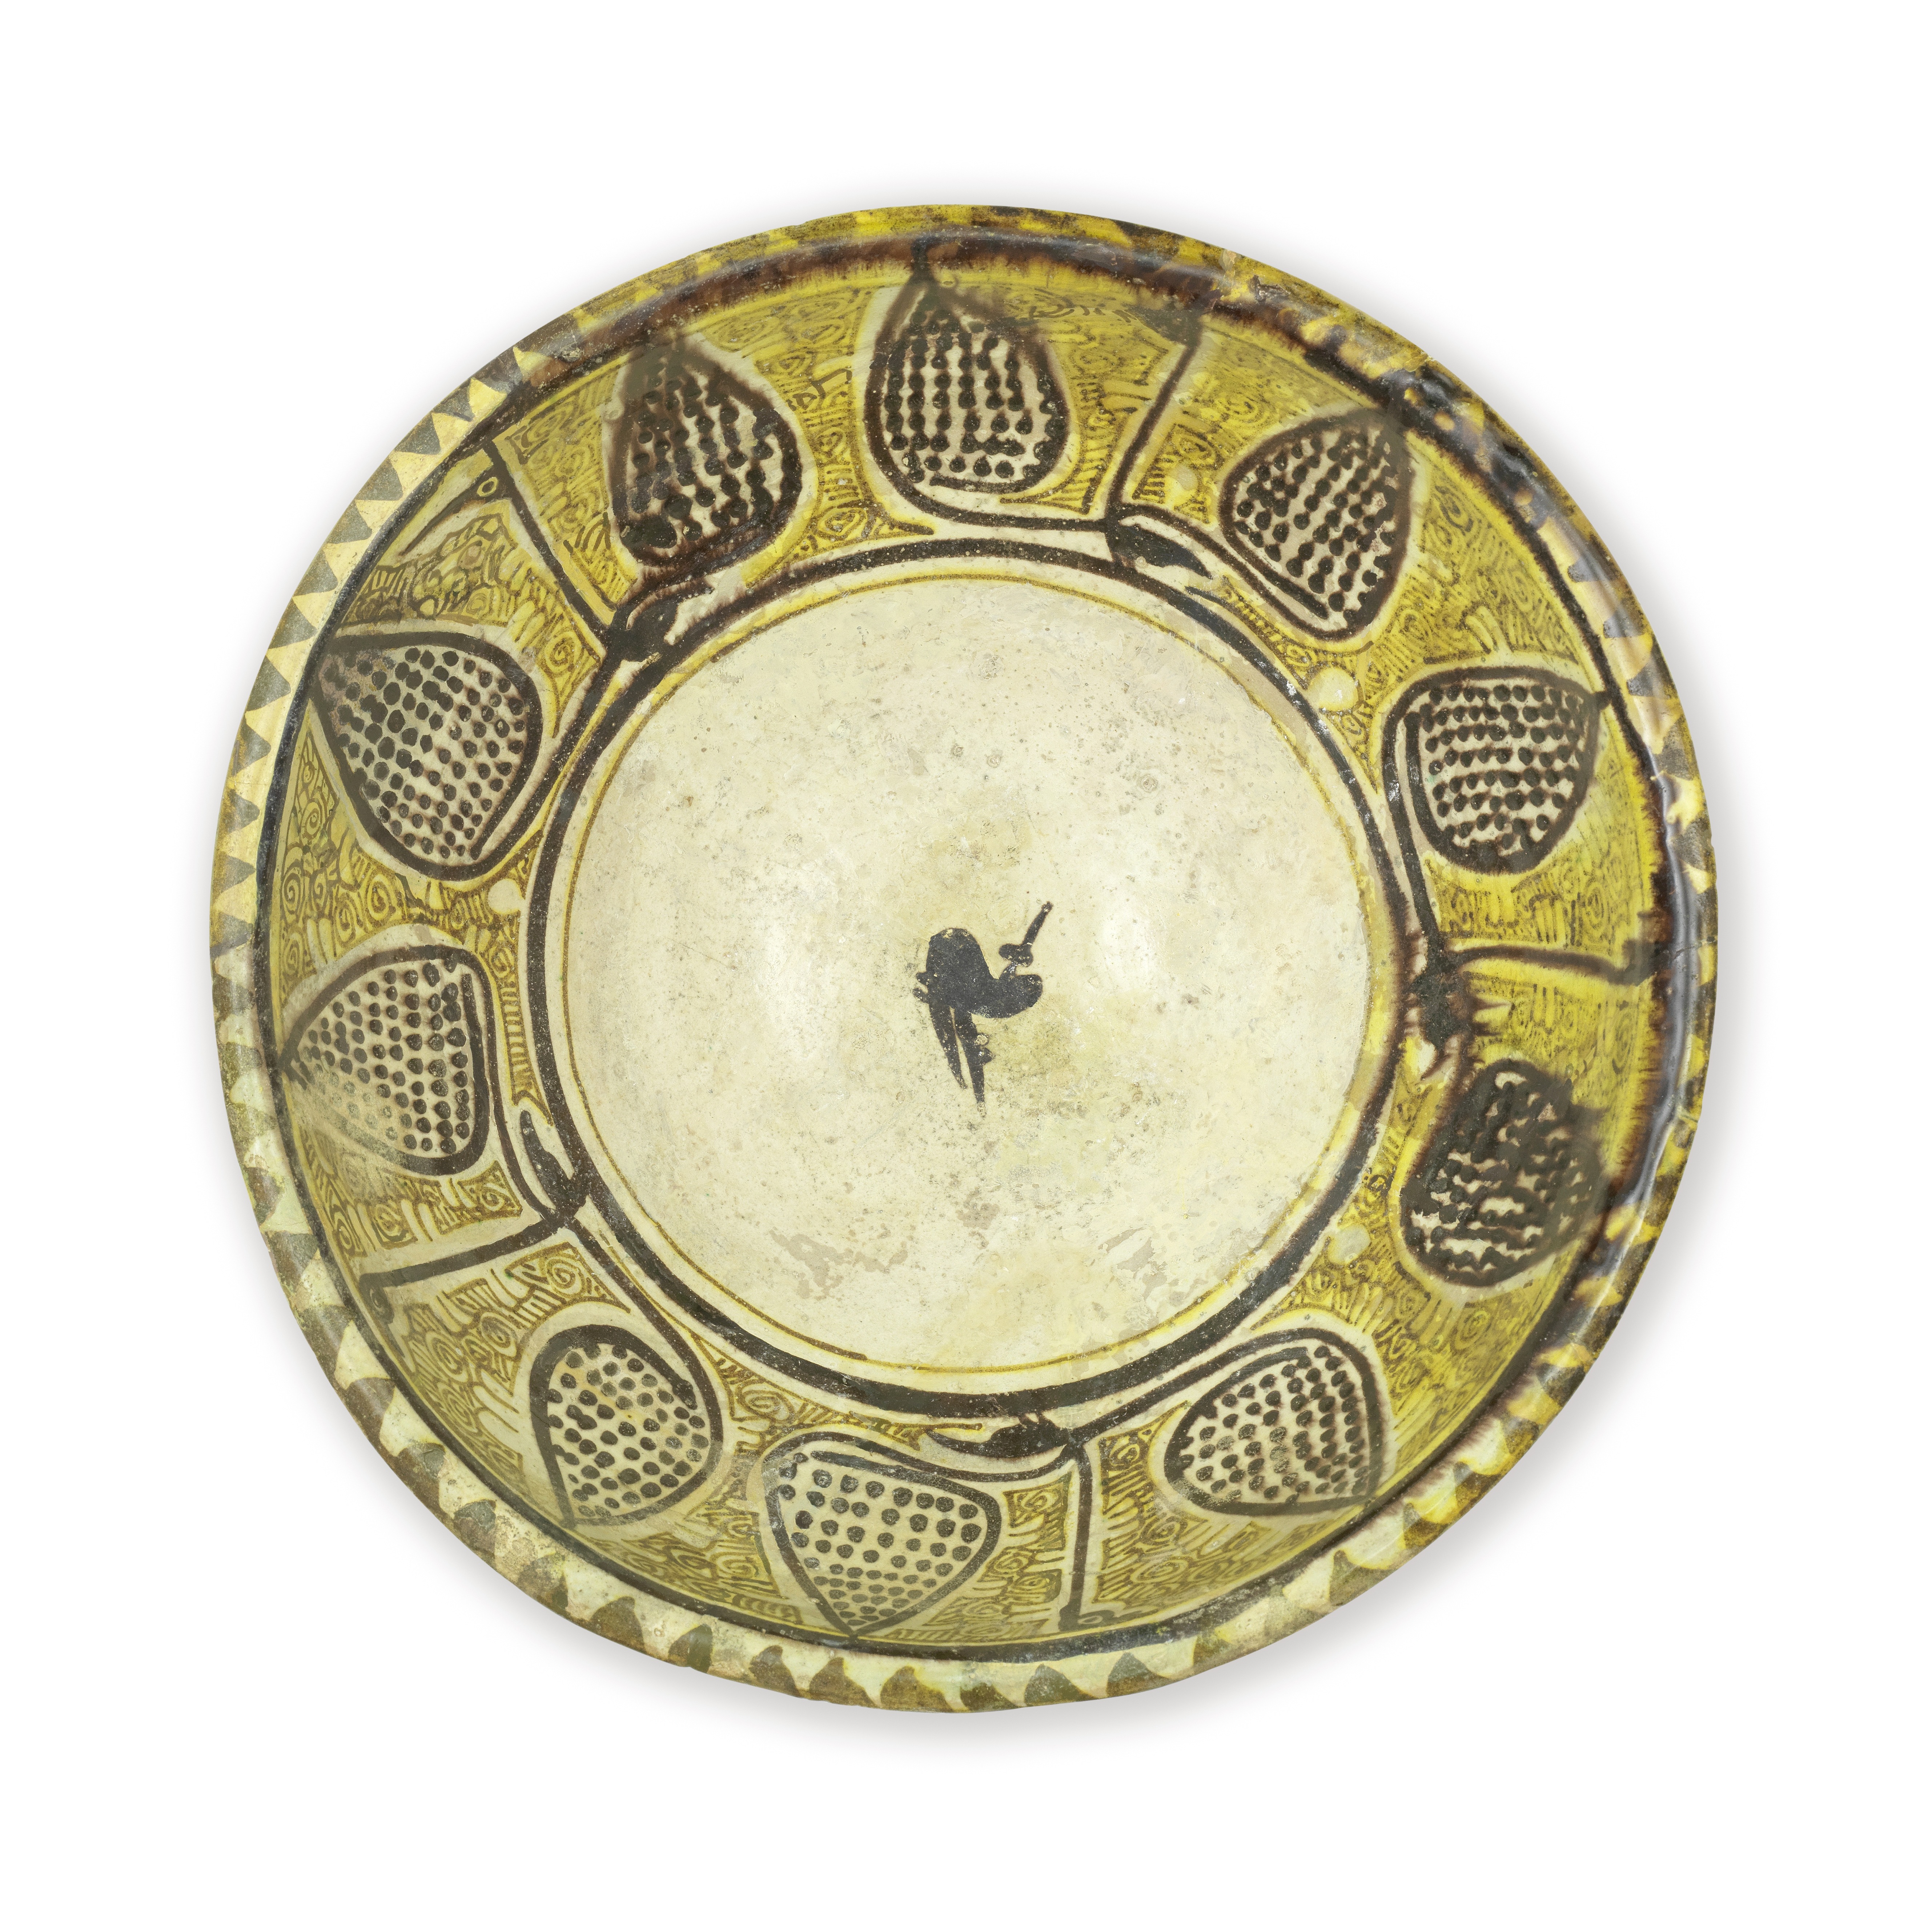 A large Nishapur 'yellow staining black' slip-painted pottery bowl Persia, 10th Century